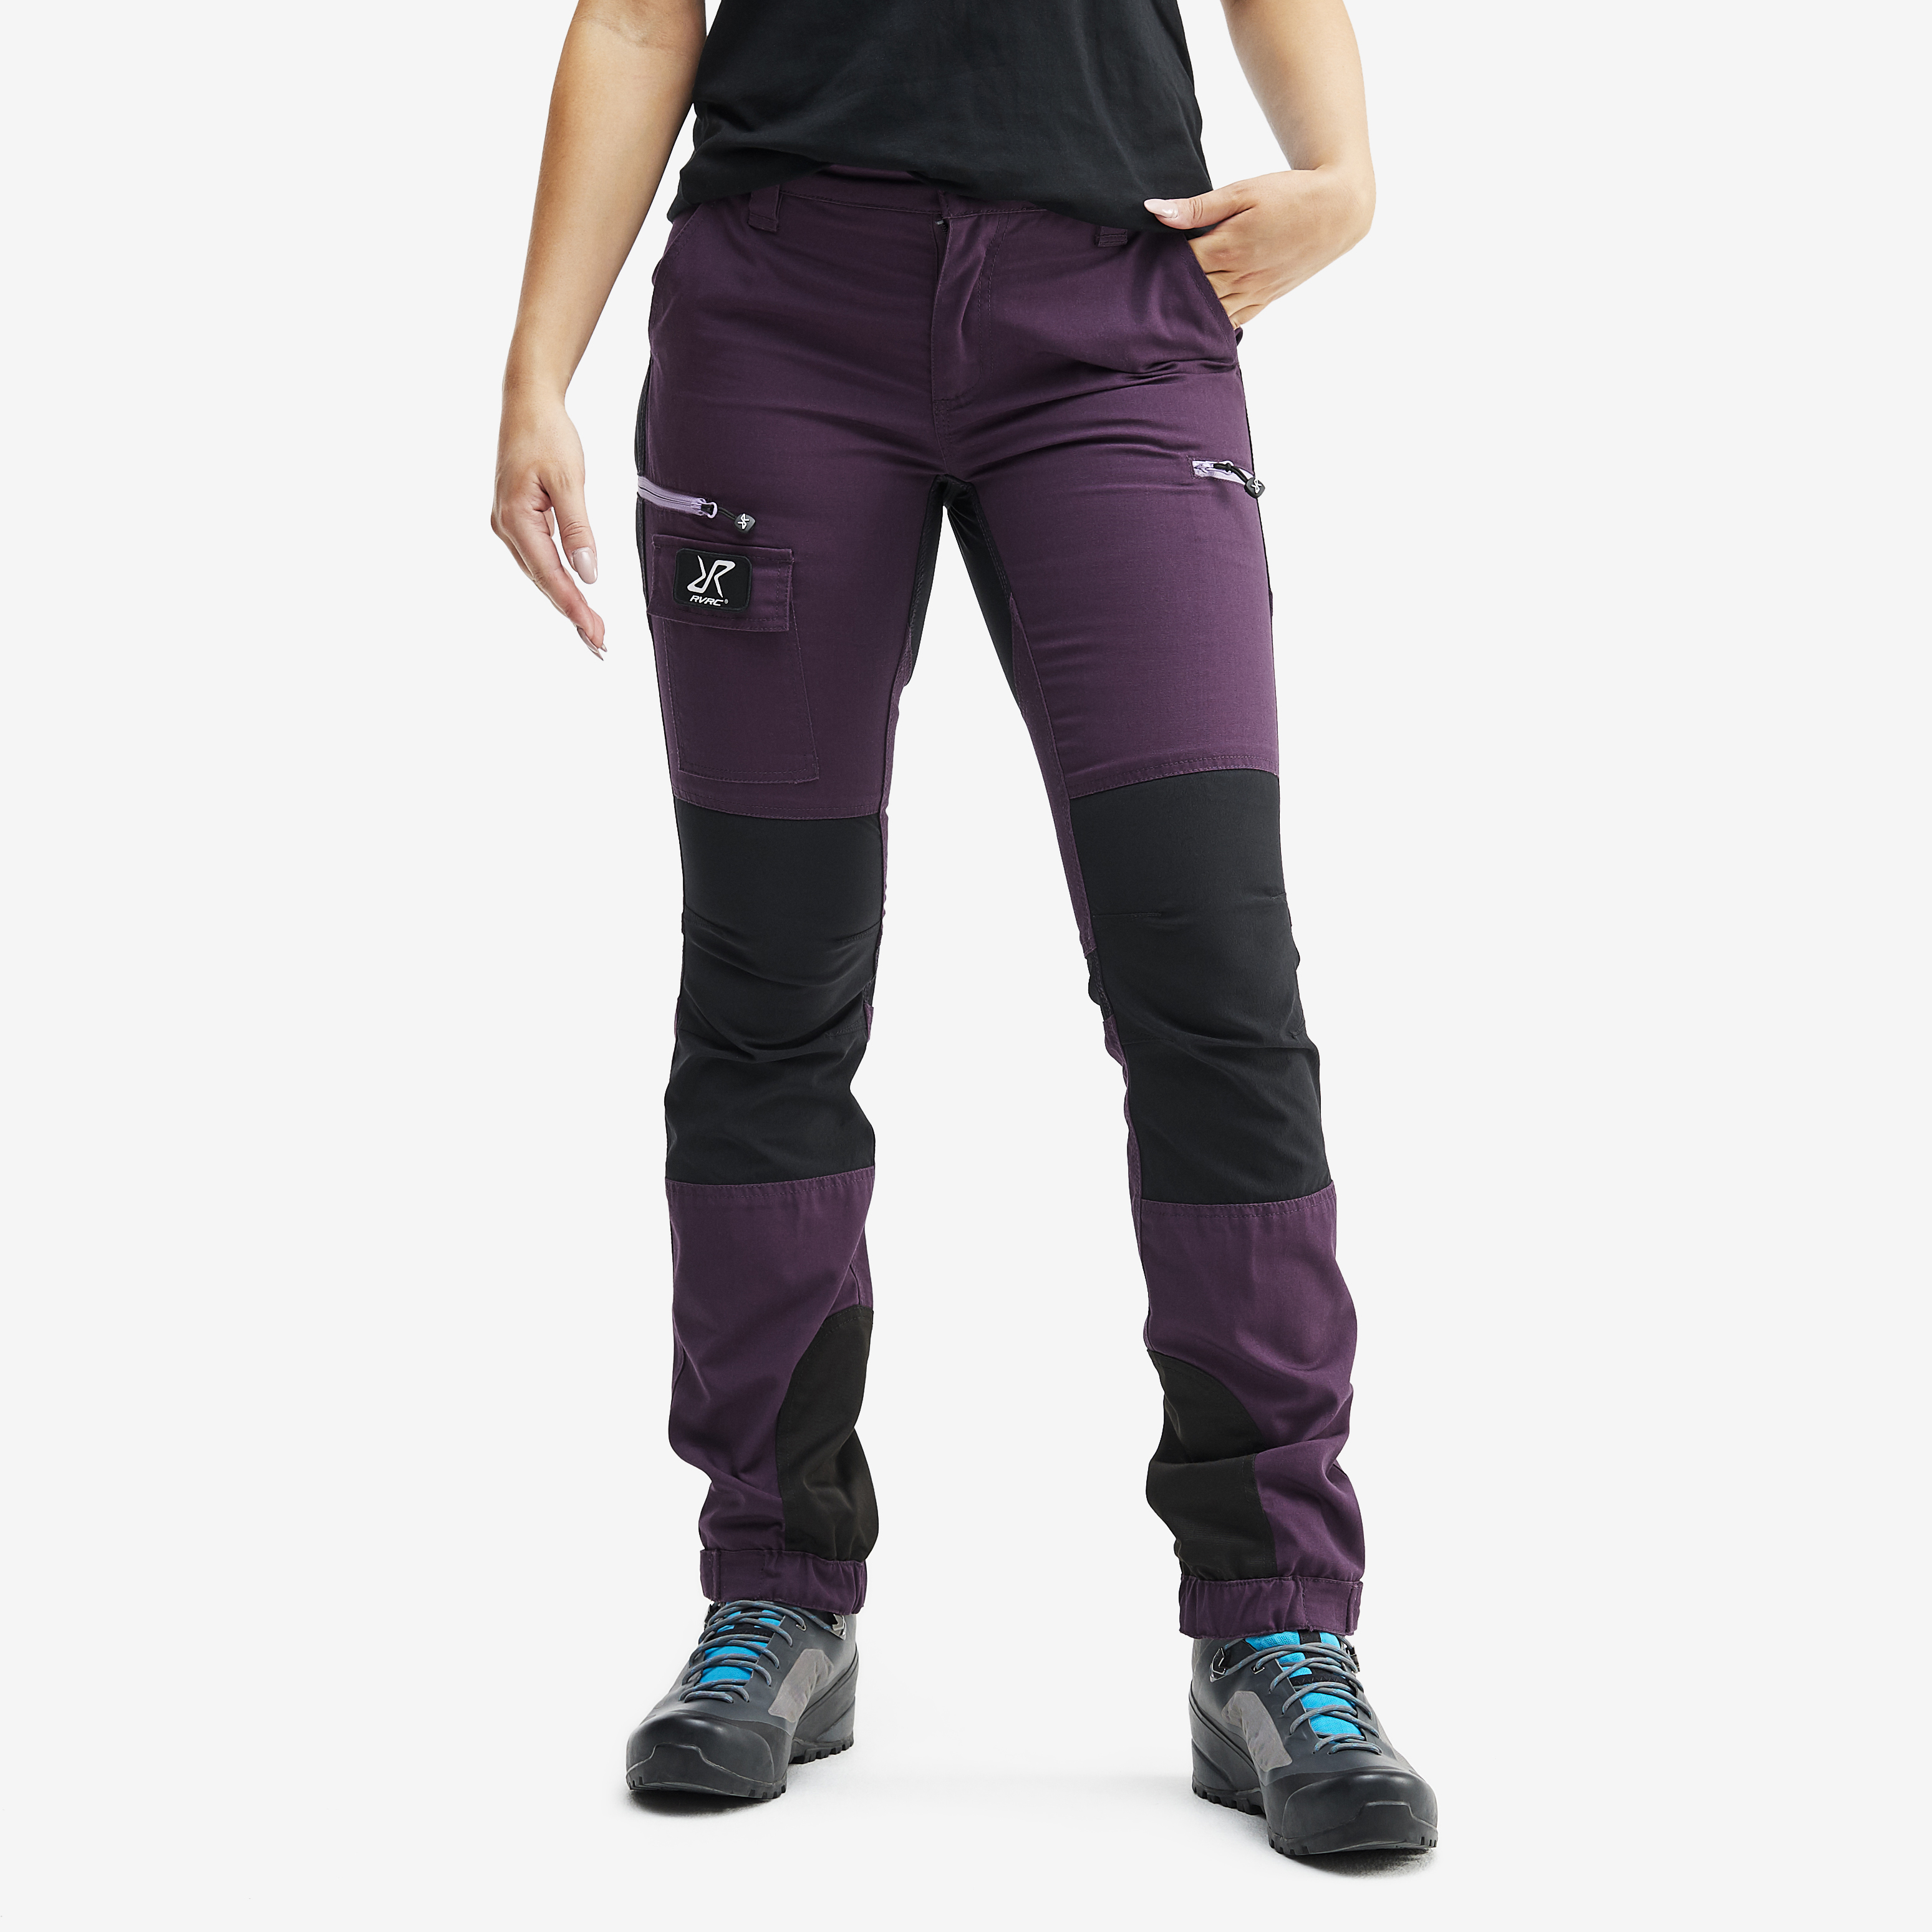 Nordwand outdoor pants for women in purple